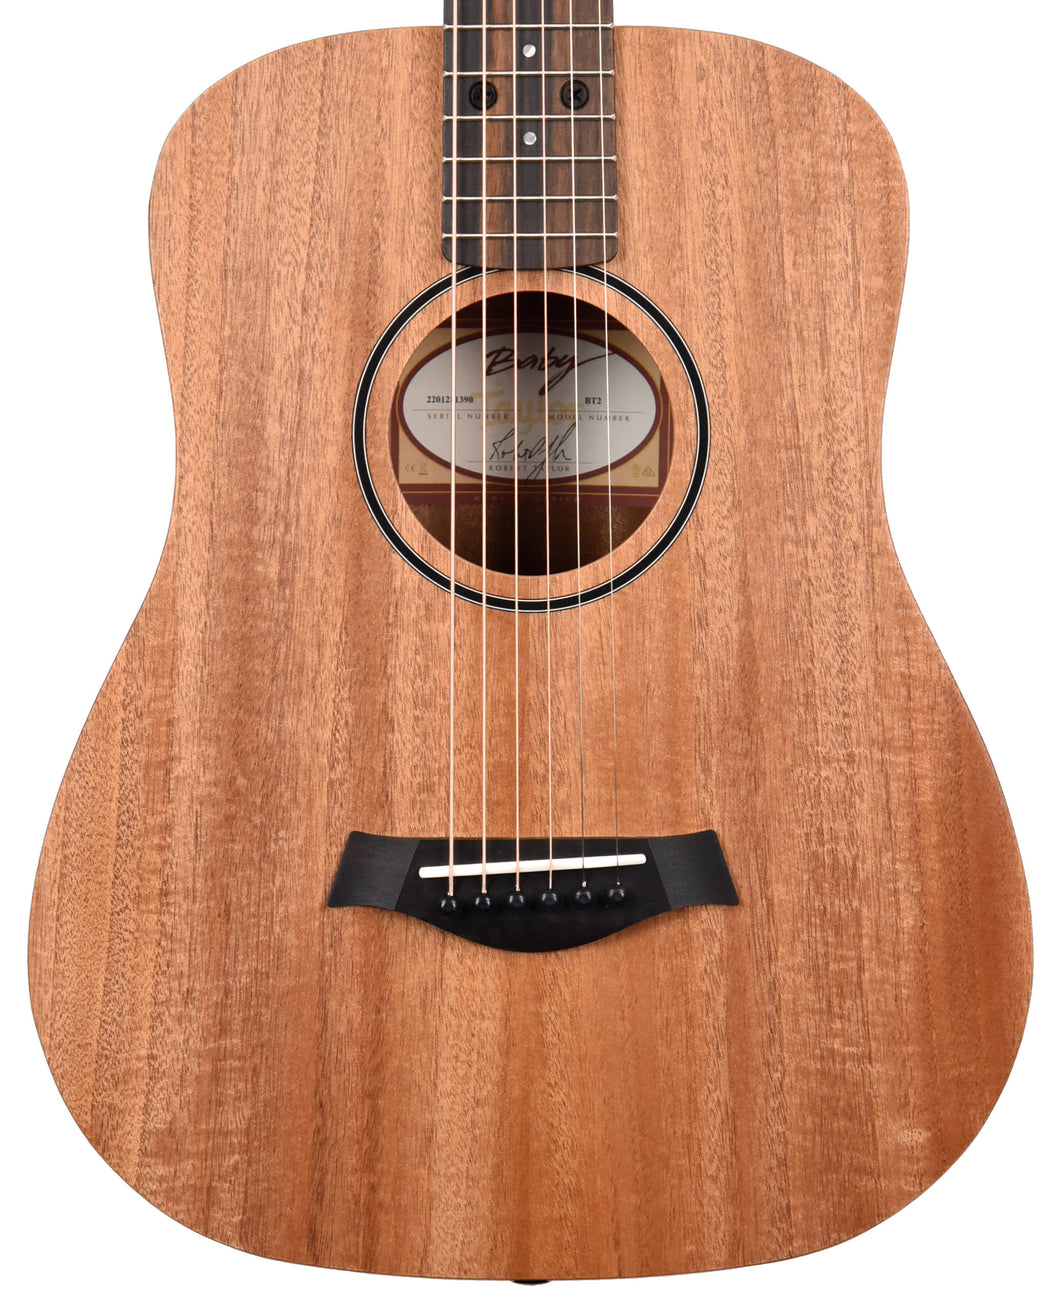 Taylor BT2 Baby Taylor Mahogany Acoustic Guitar 2201211390 - The Music Gallery